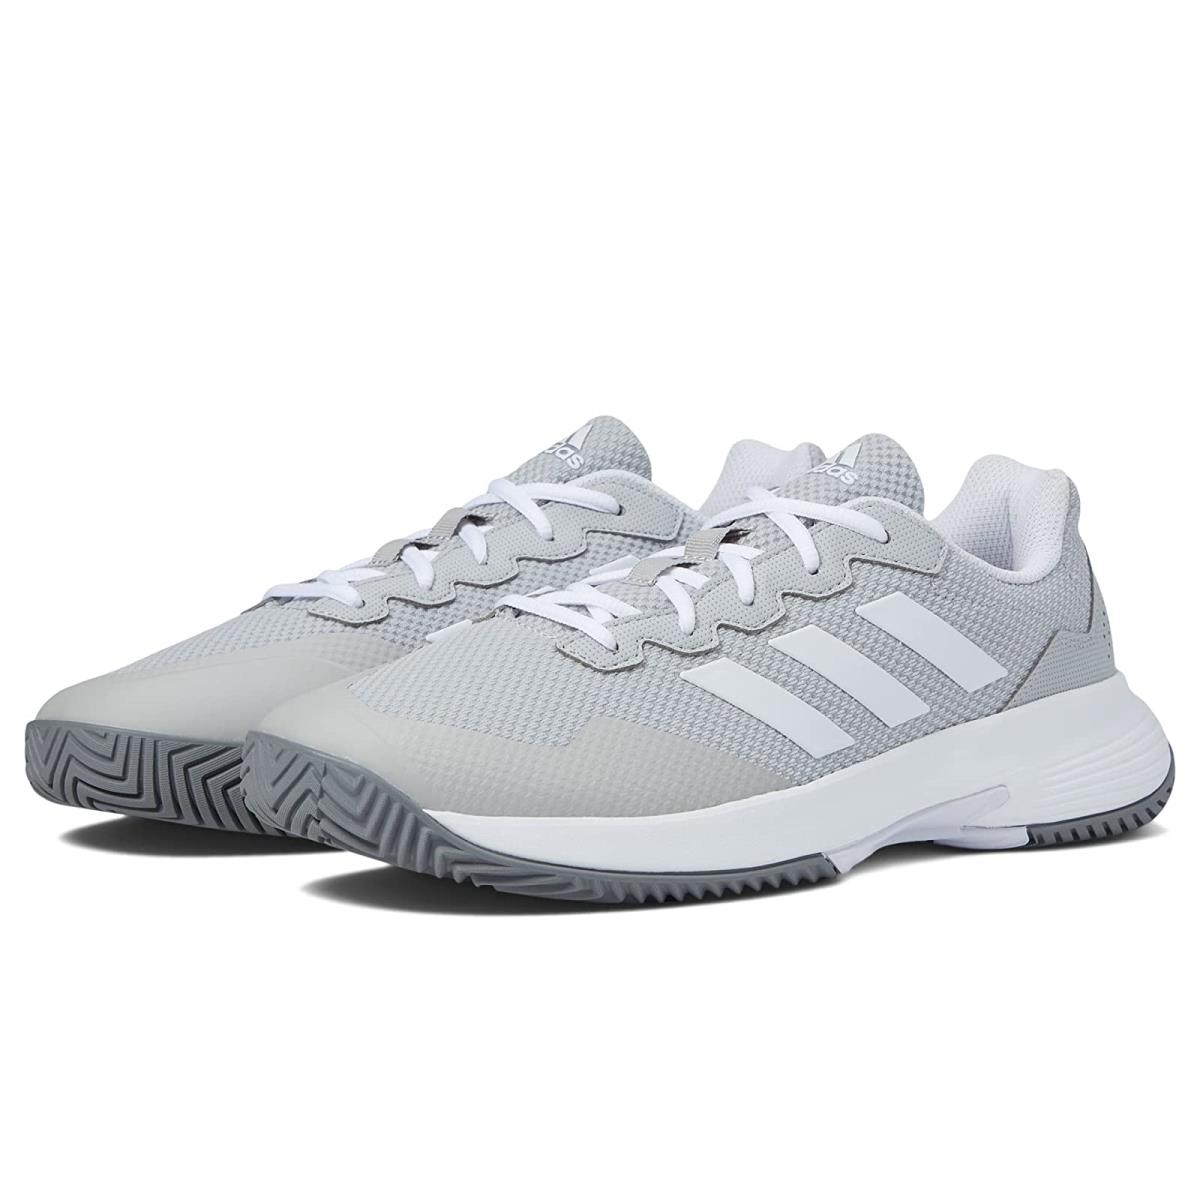 Man`s Sneakers Athletic Shoes Adidas Gamecourt 2 Grey/White/Grey